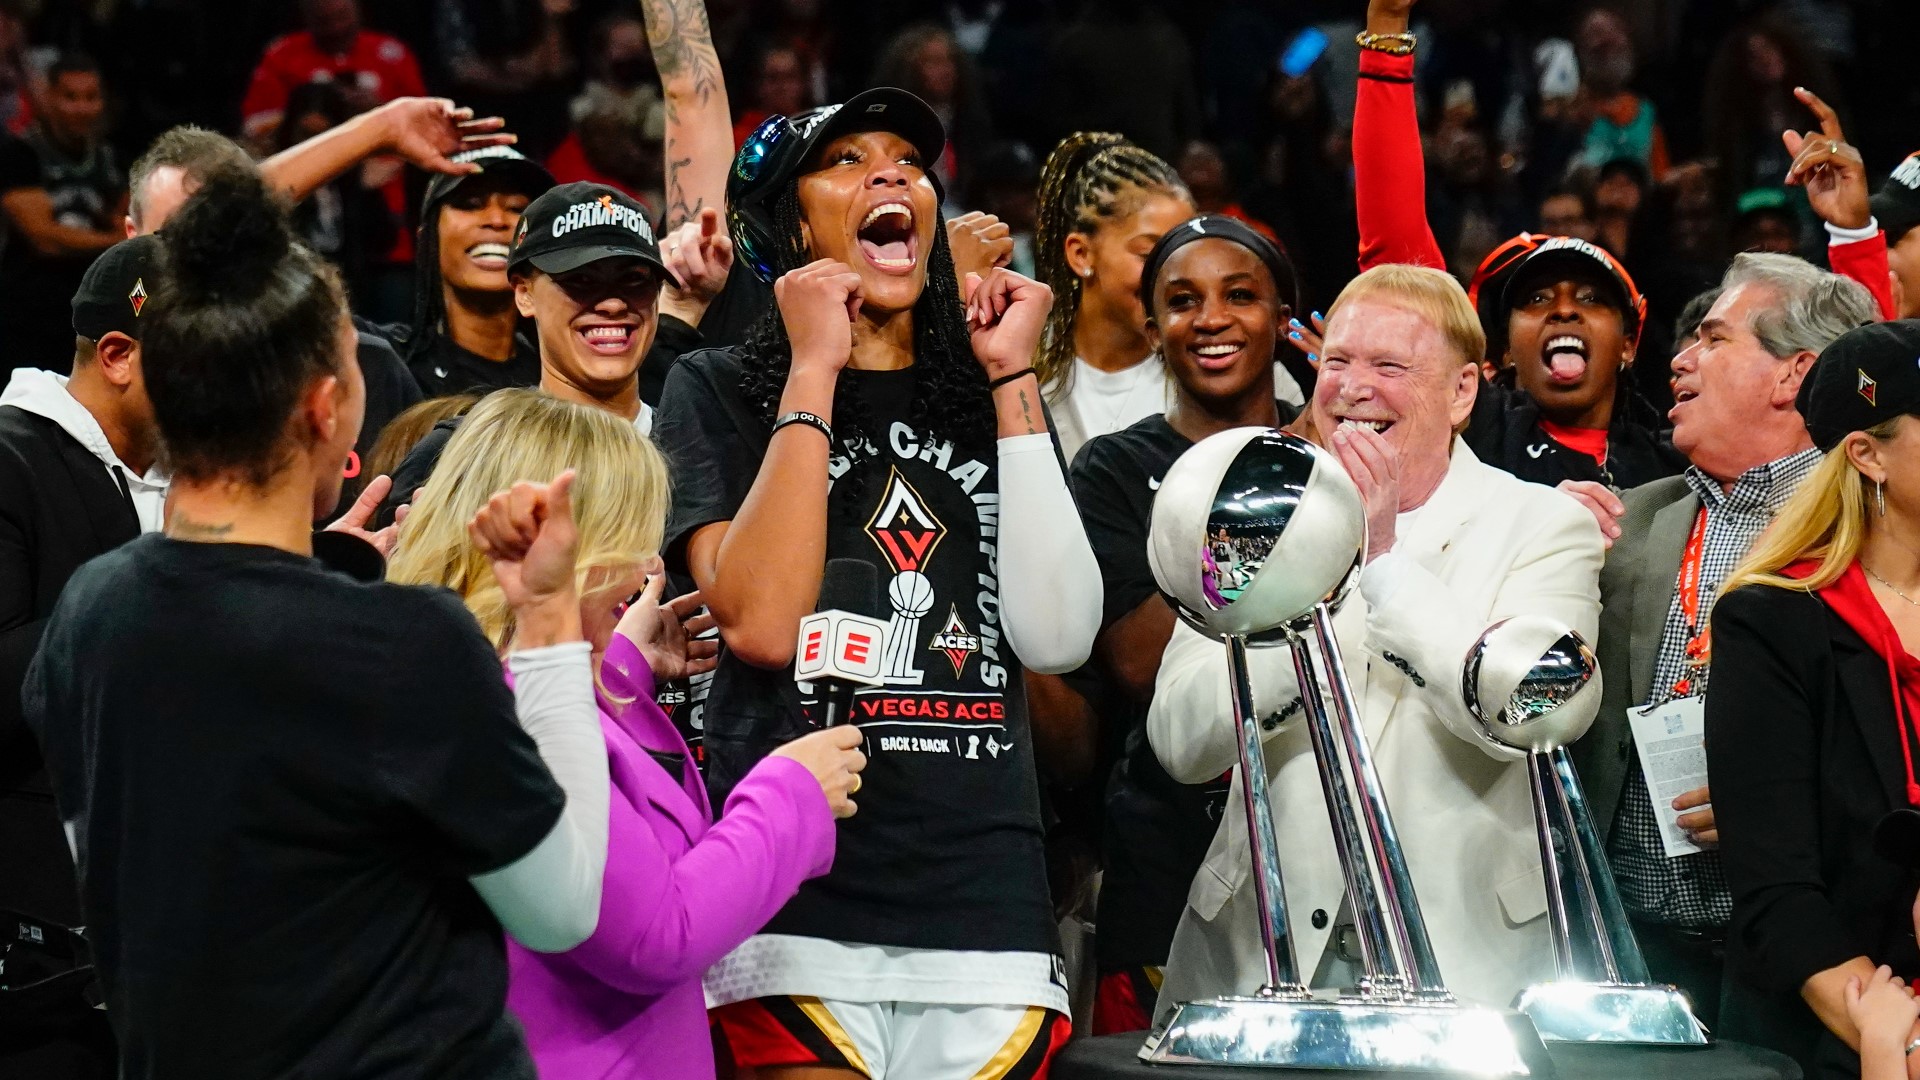 The Las Vegas Aces became the first team in 21 years to win back-to-back WNBA championships, getting 24 points and 16 rebounds from Gamecock alum A'ja Wilson.